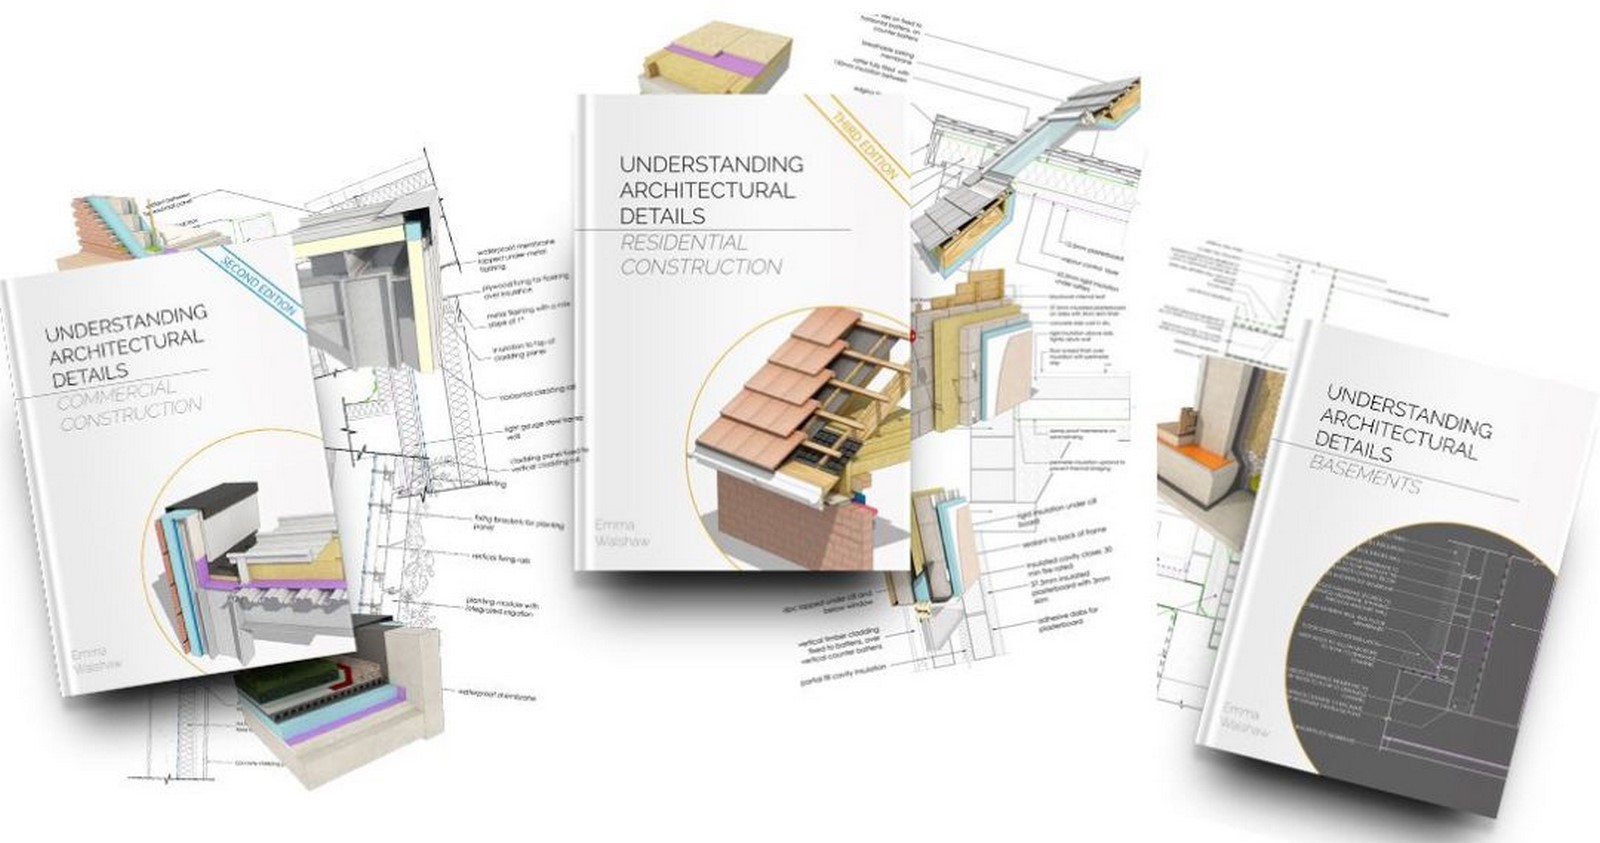 10 Books for Architectural Detailing and Construction that architects must know - Sheet9